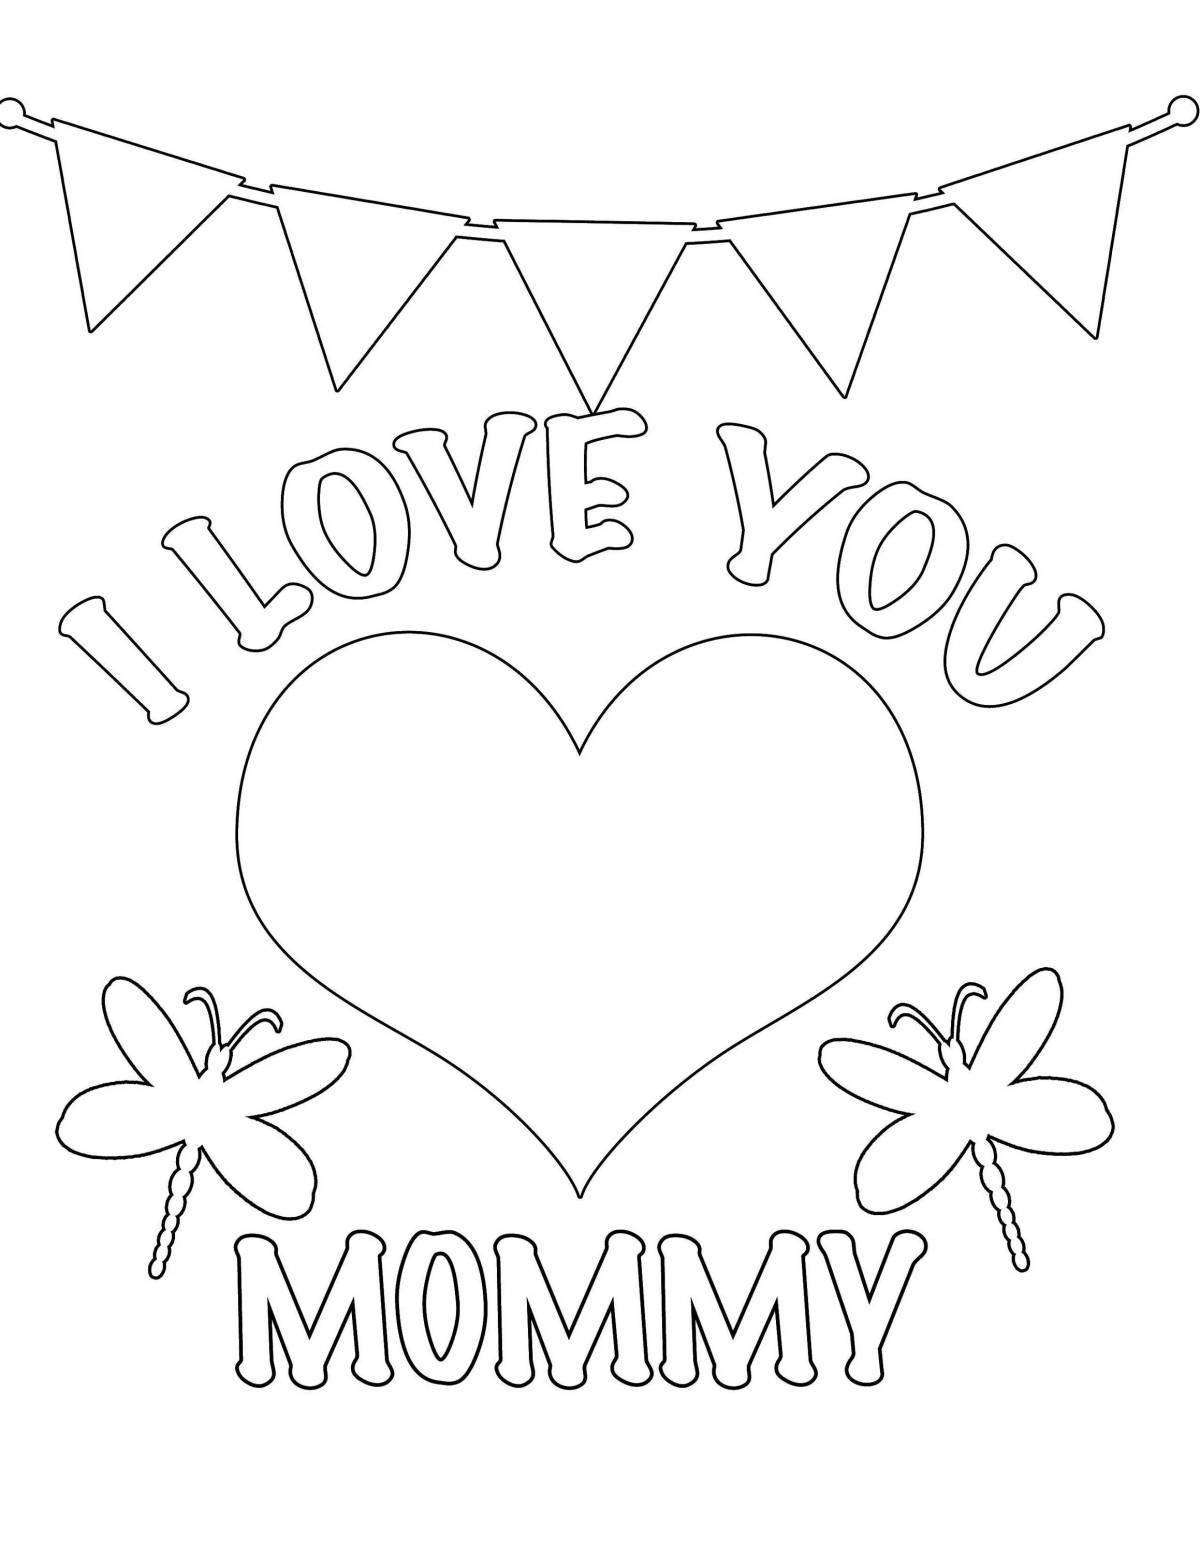 Coloring page a generous gift for mom